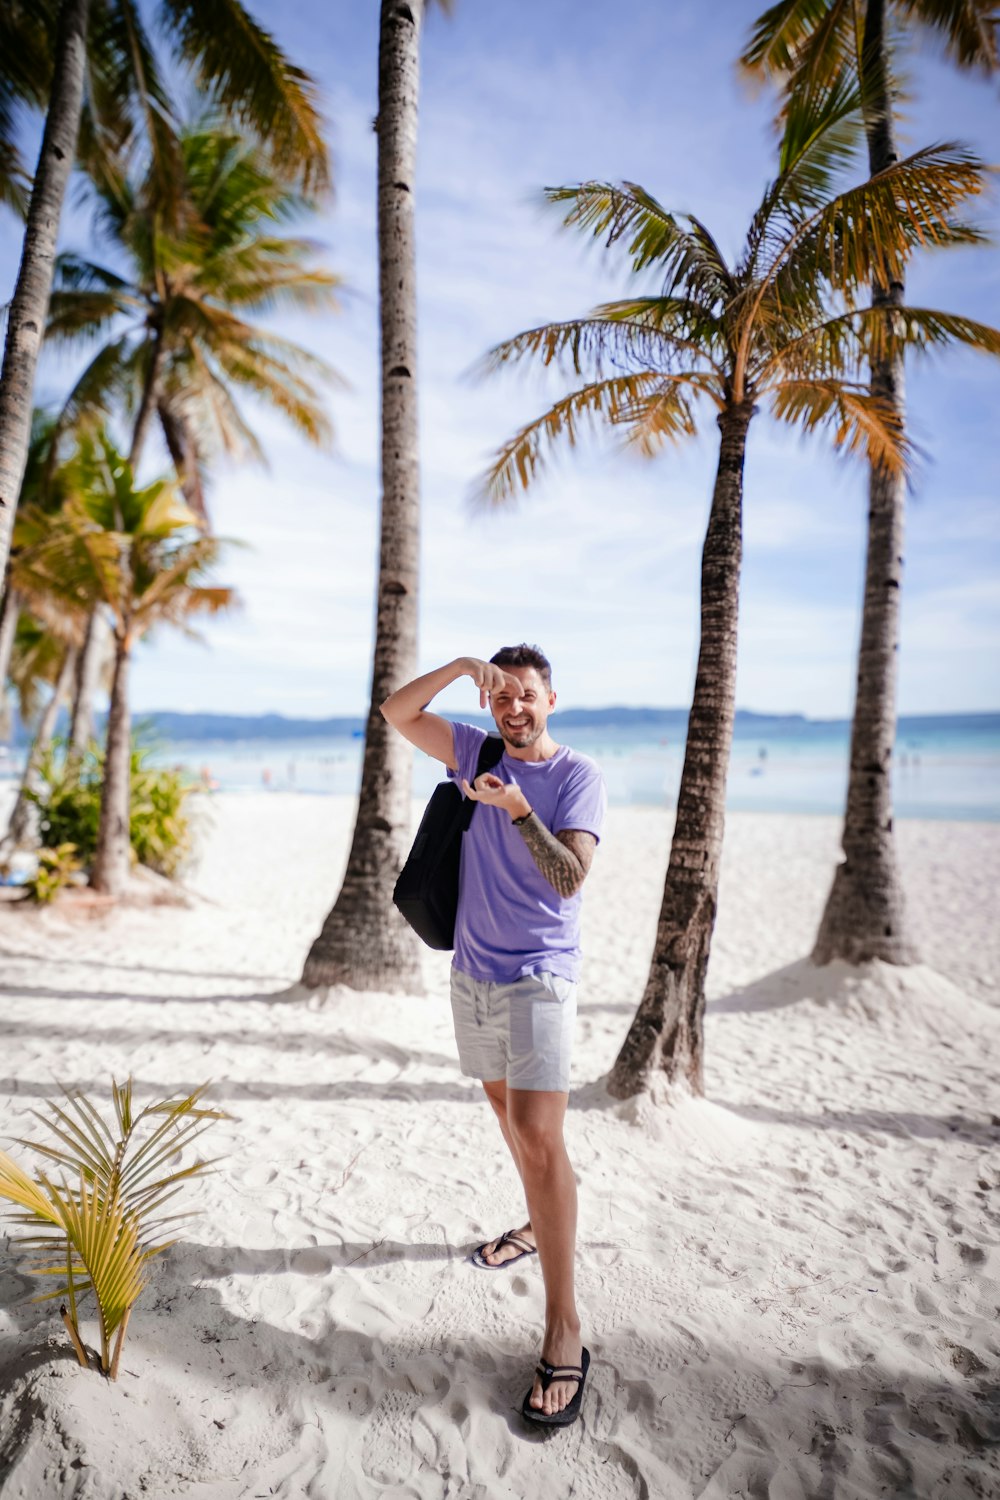 a man standing on a beach next to palm trees